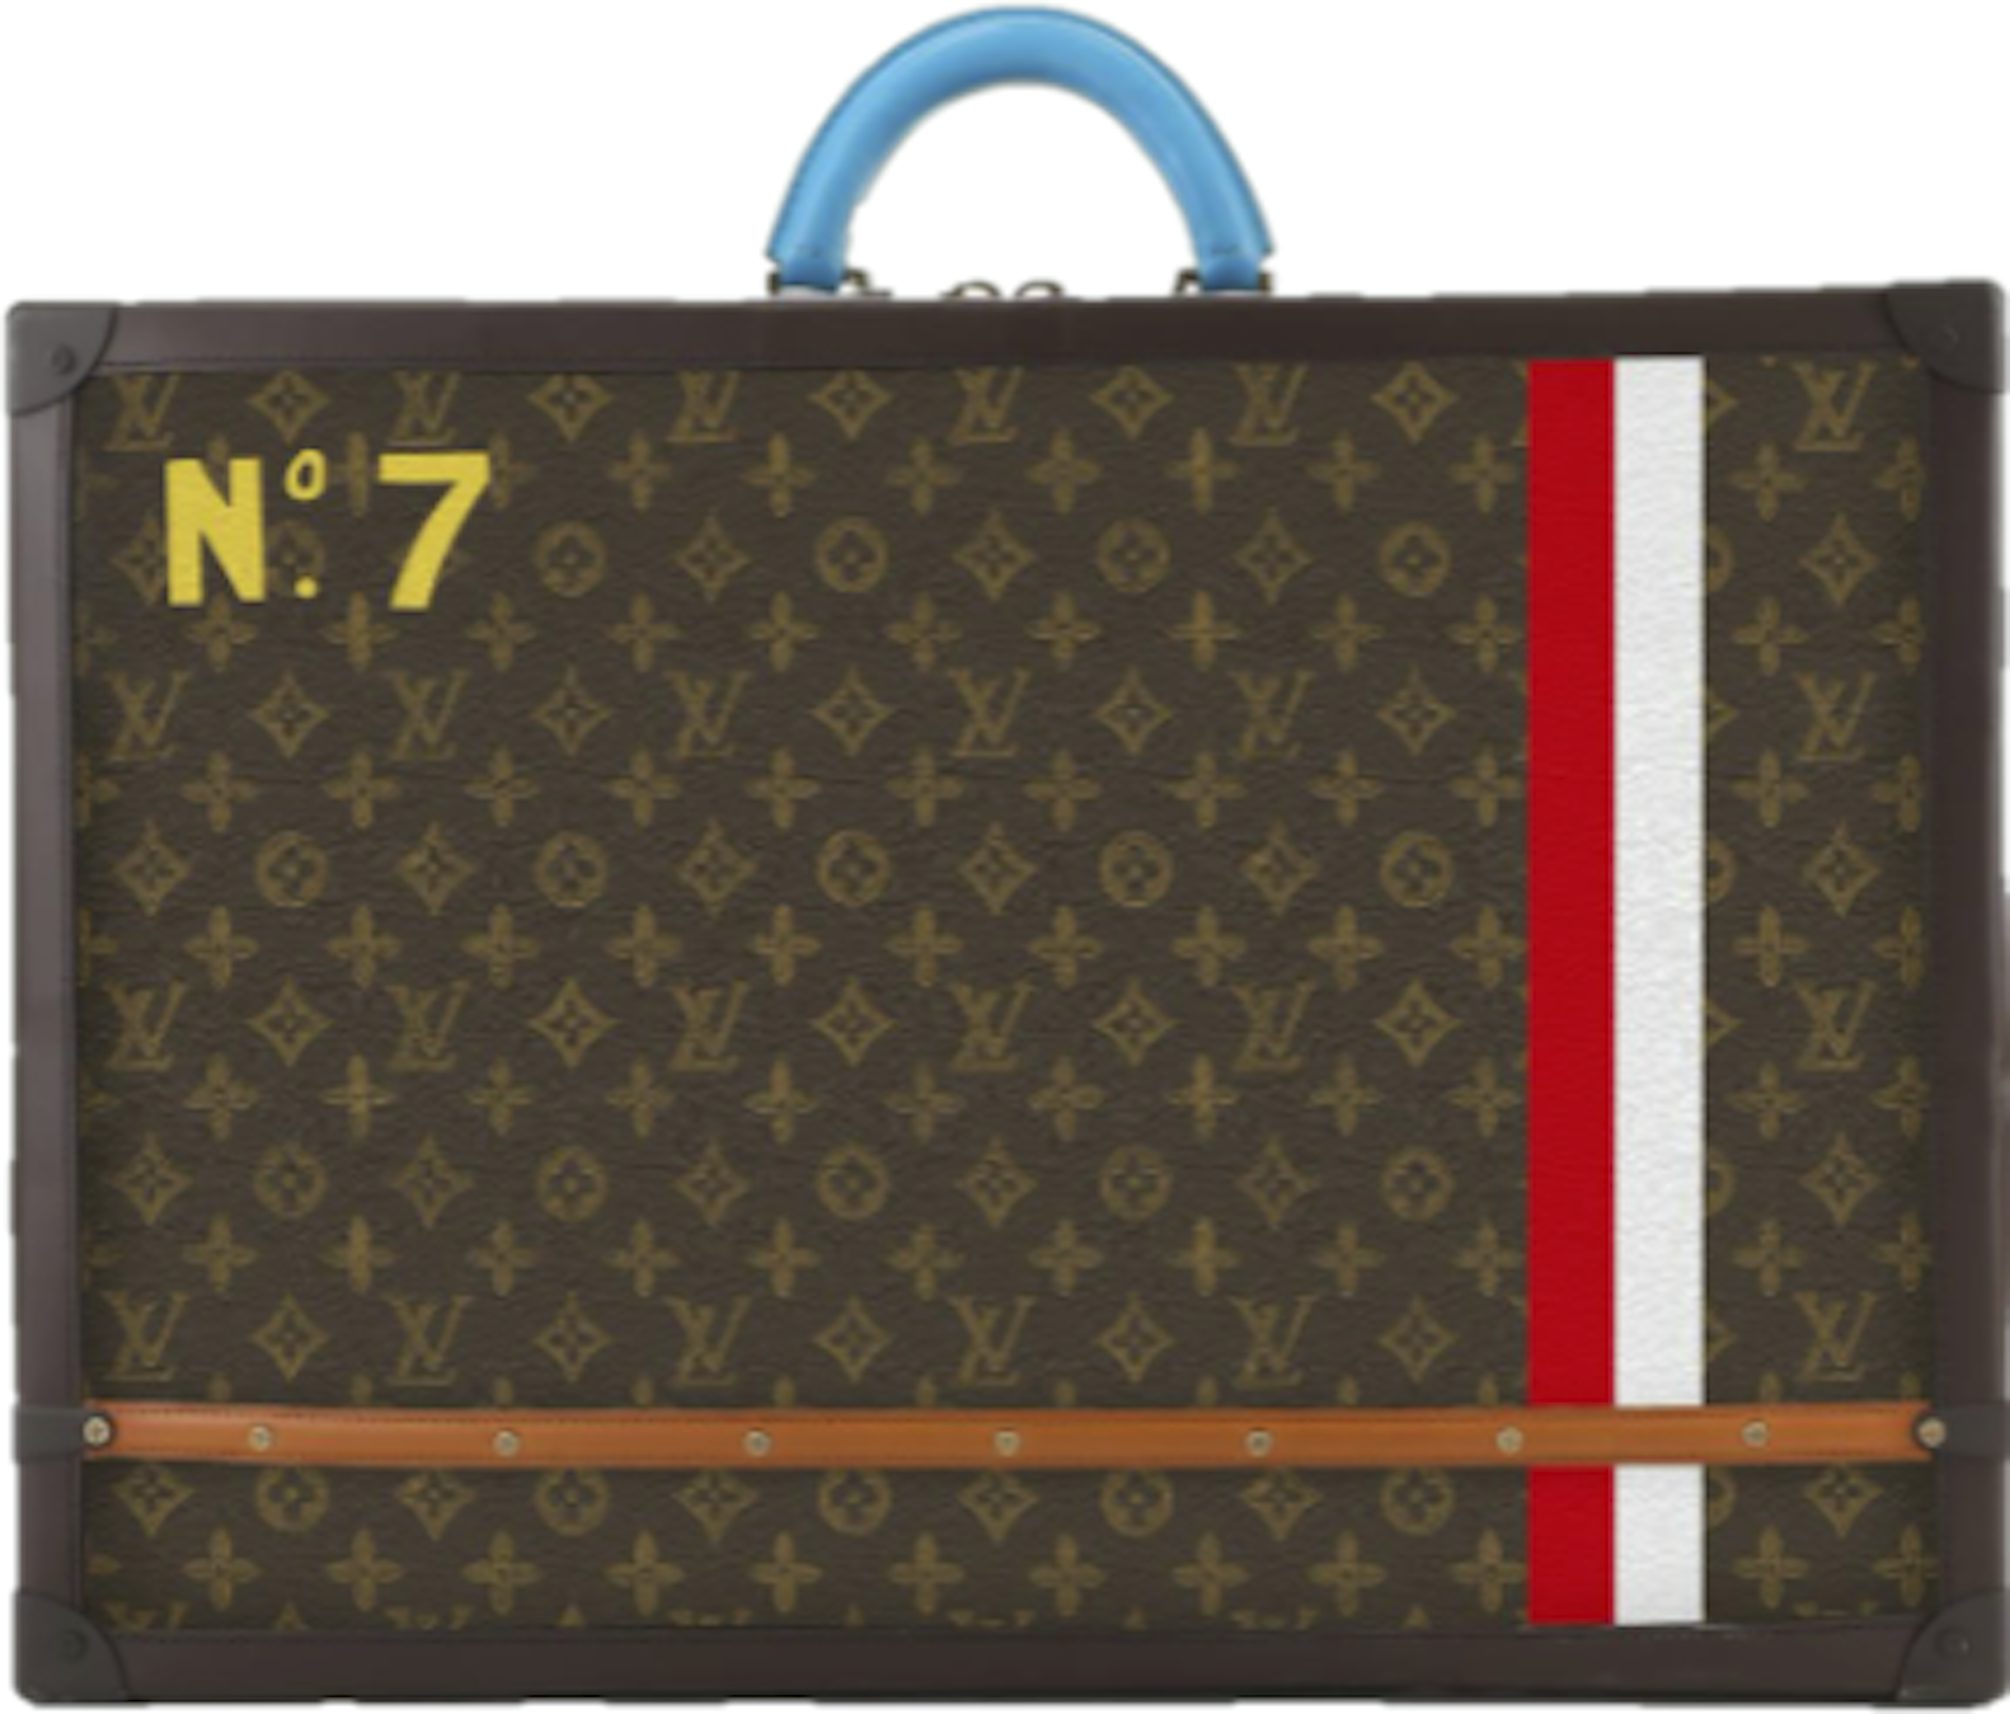 LV Alzer v Bisten - WHICH IS BETTER? - Collecting Louis Vuitton